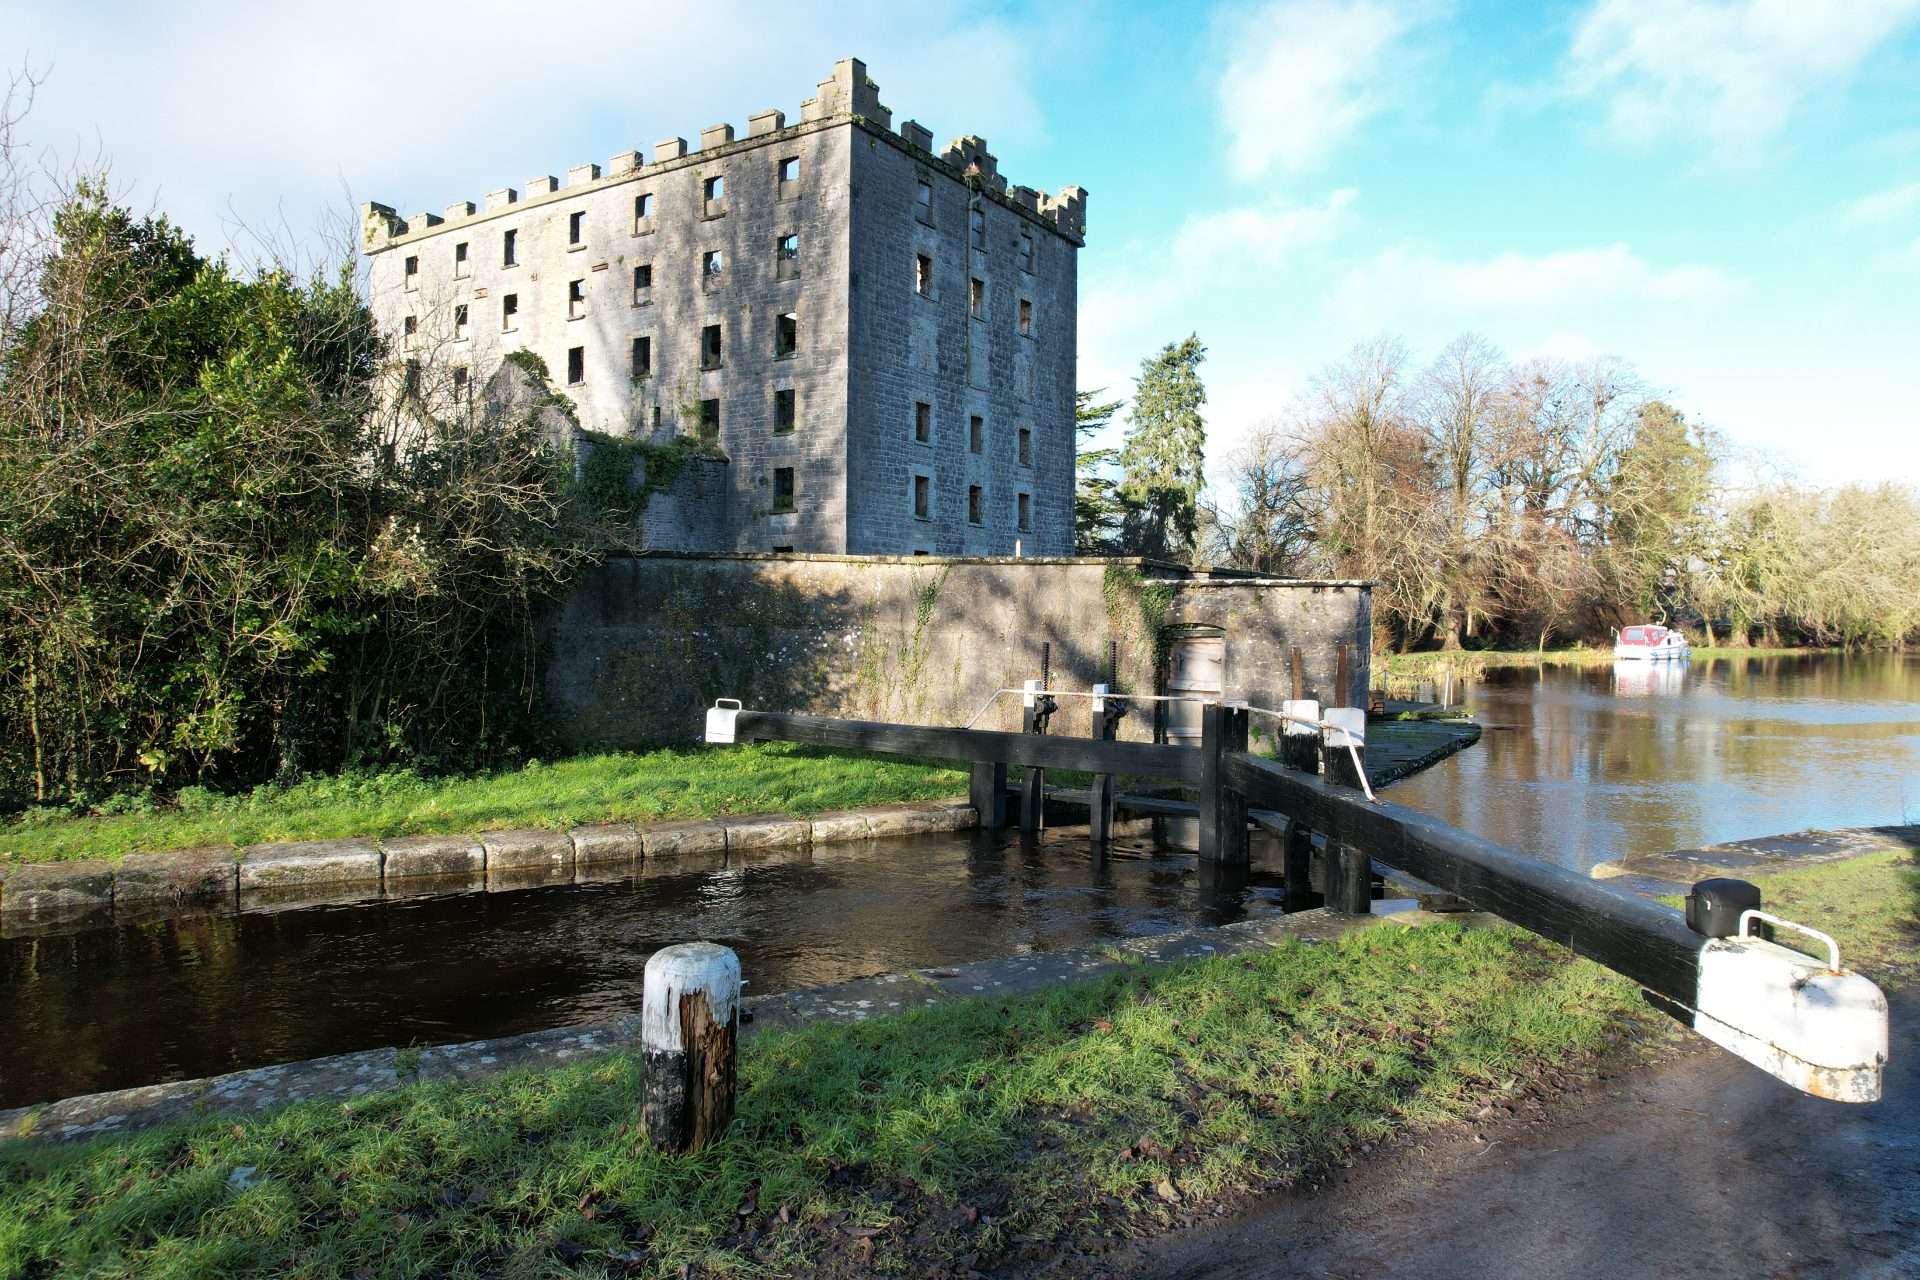 Levitstown Mill and Lock Gates in winter